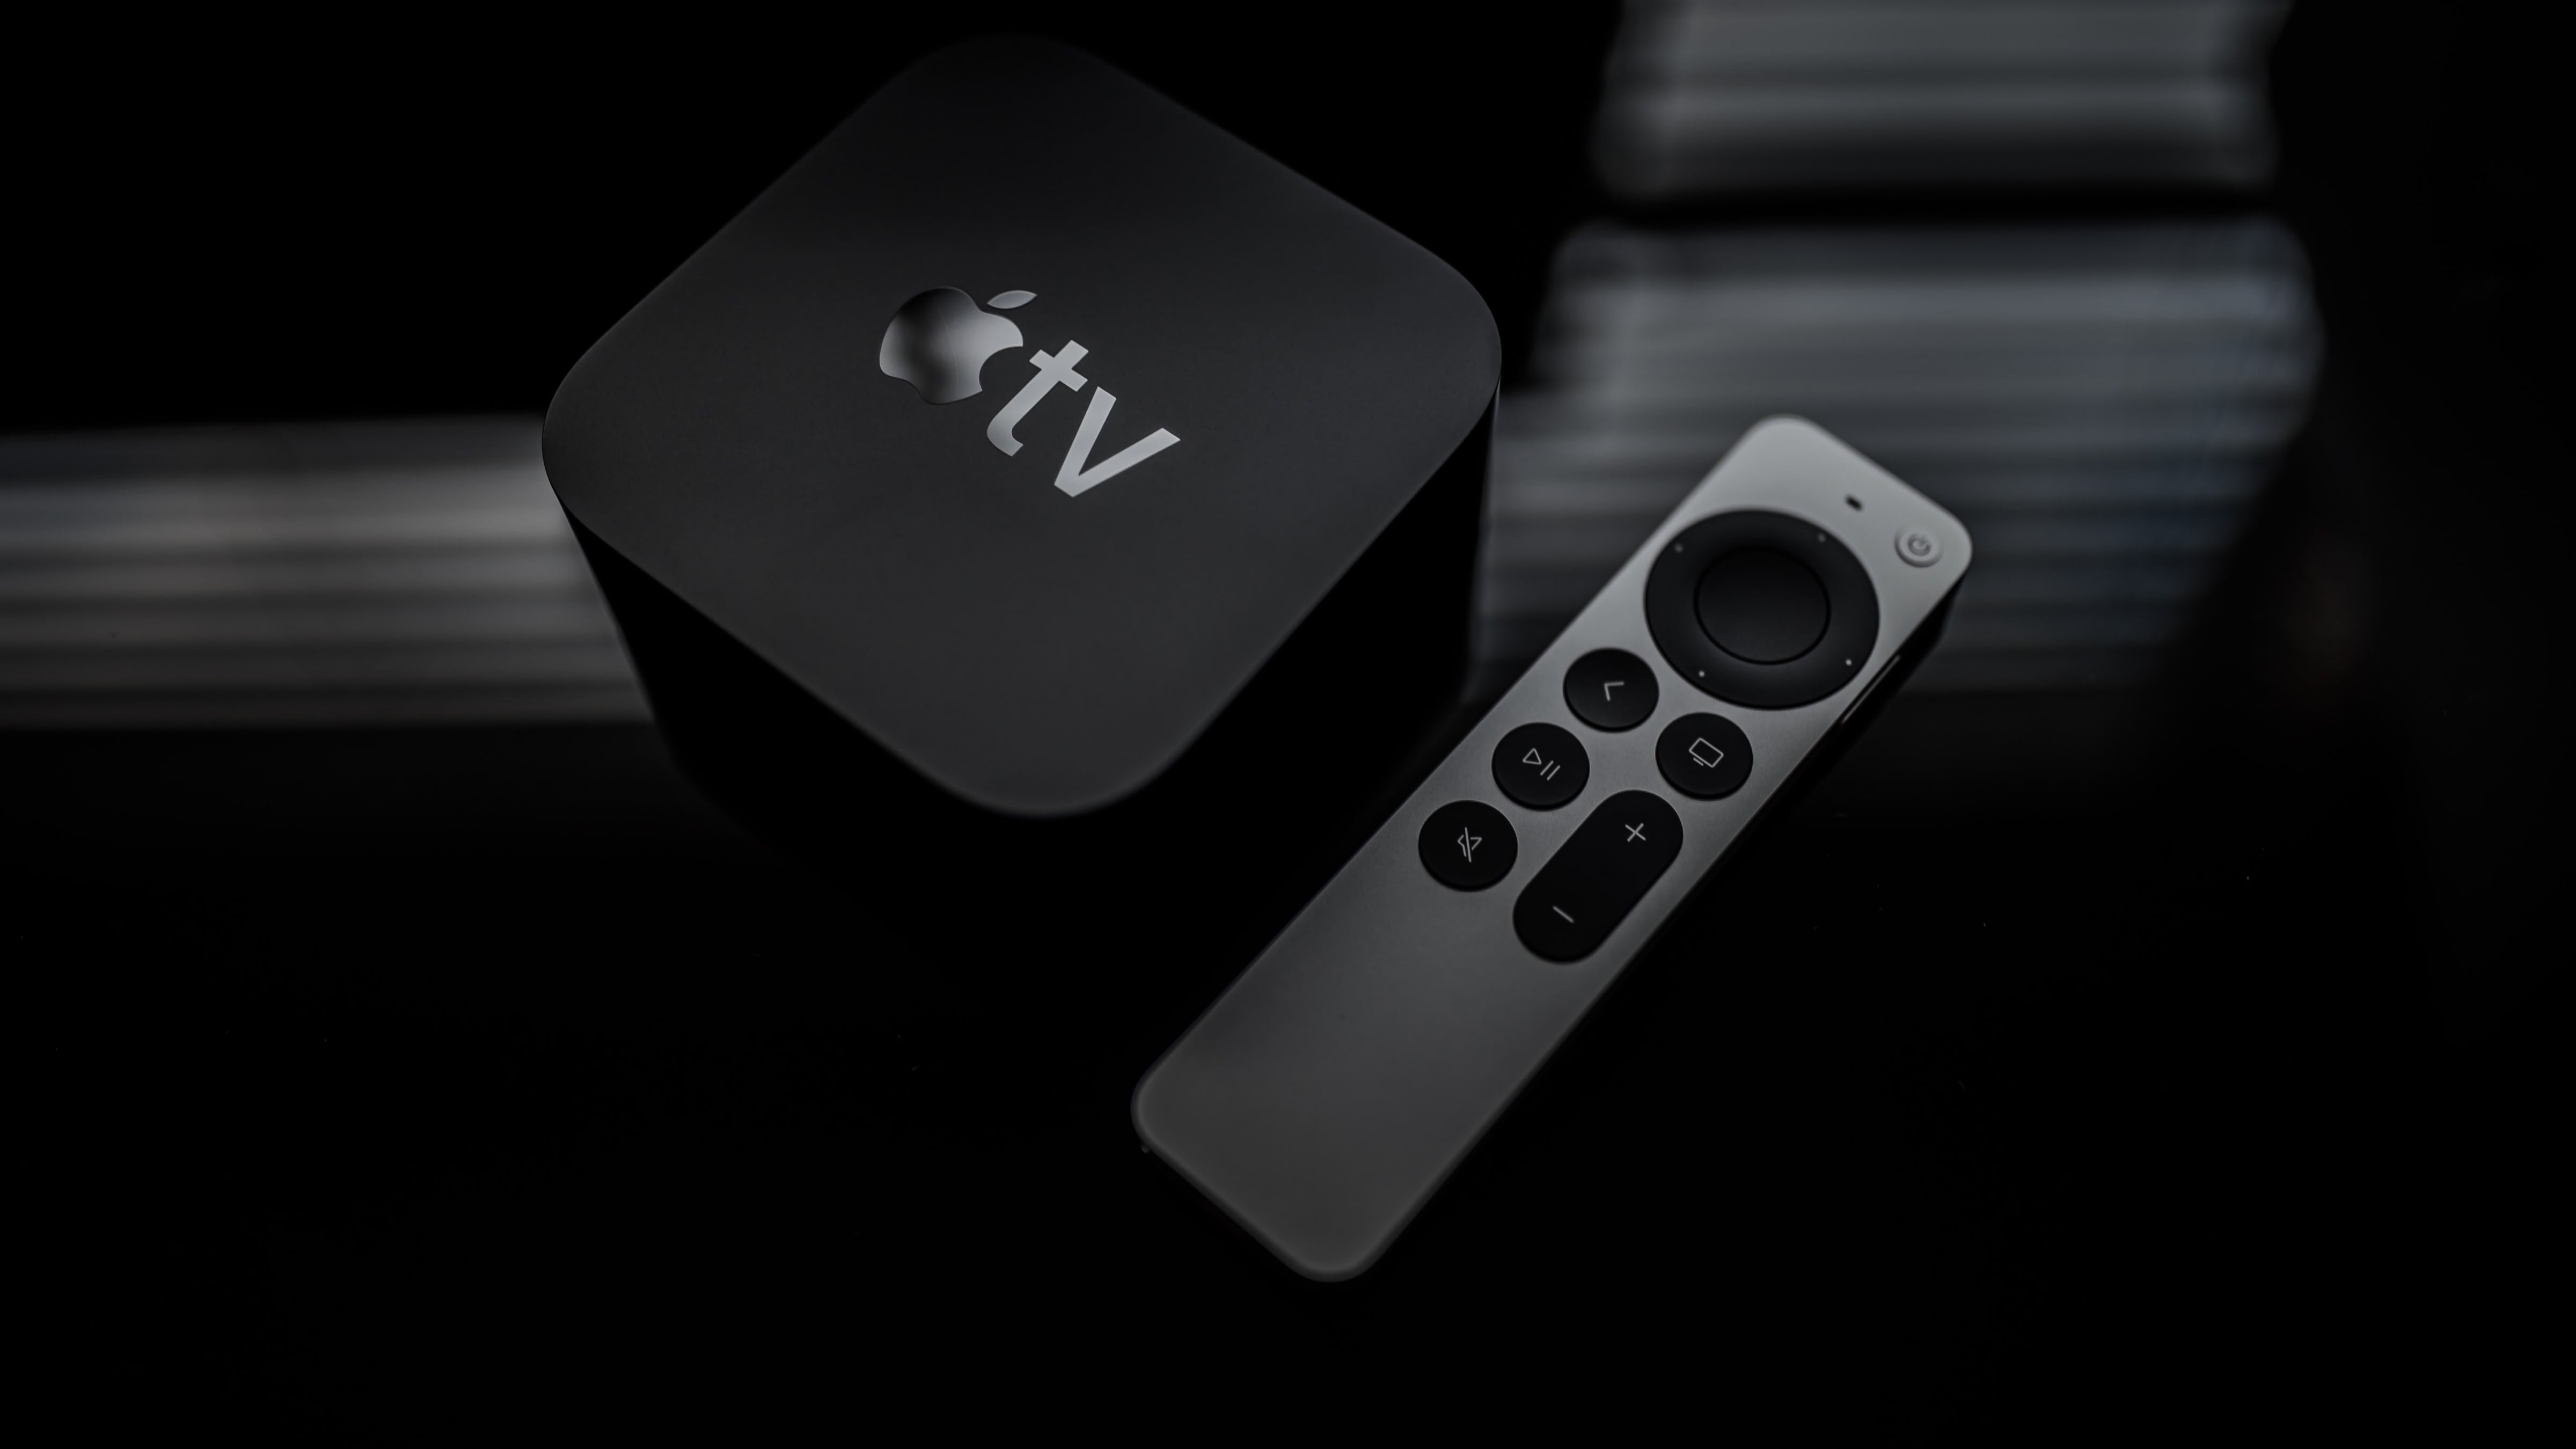 A tvOS update will fix Apple TV blackouts when switching video modes